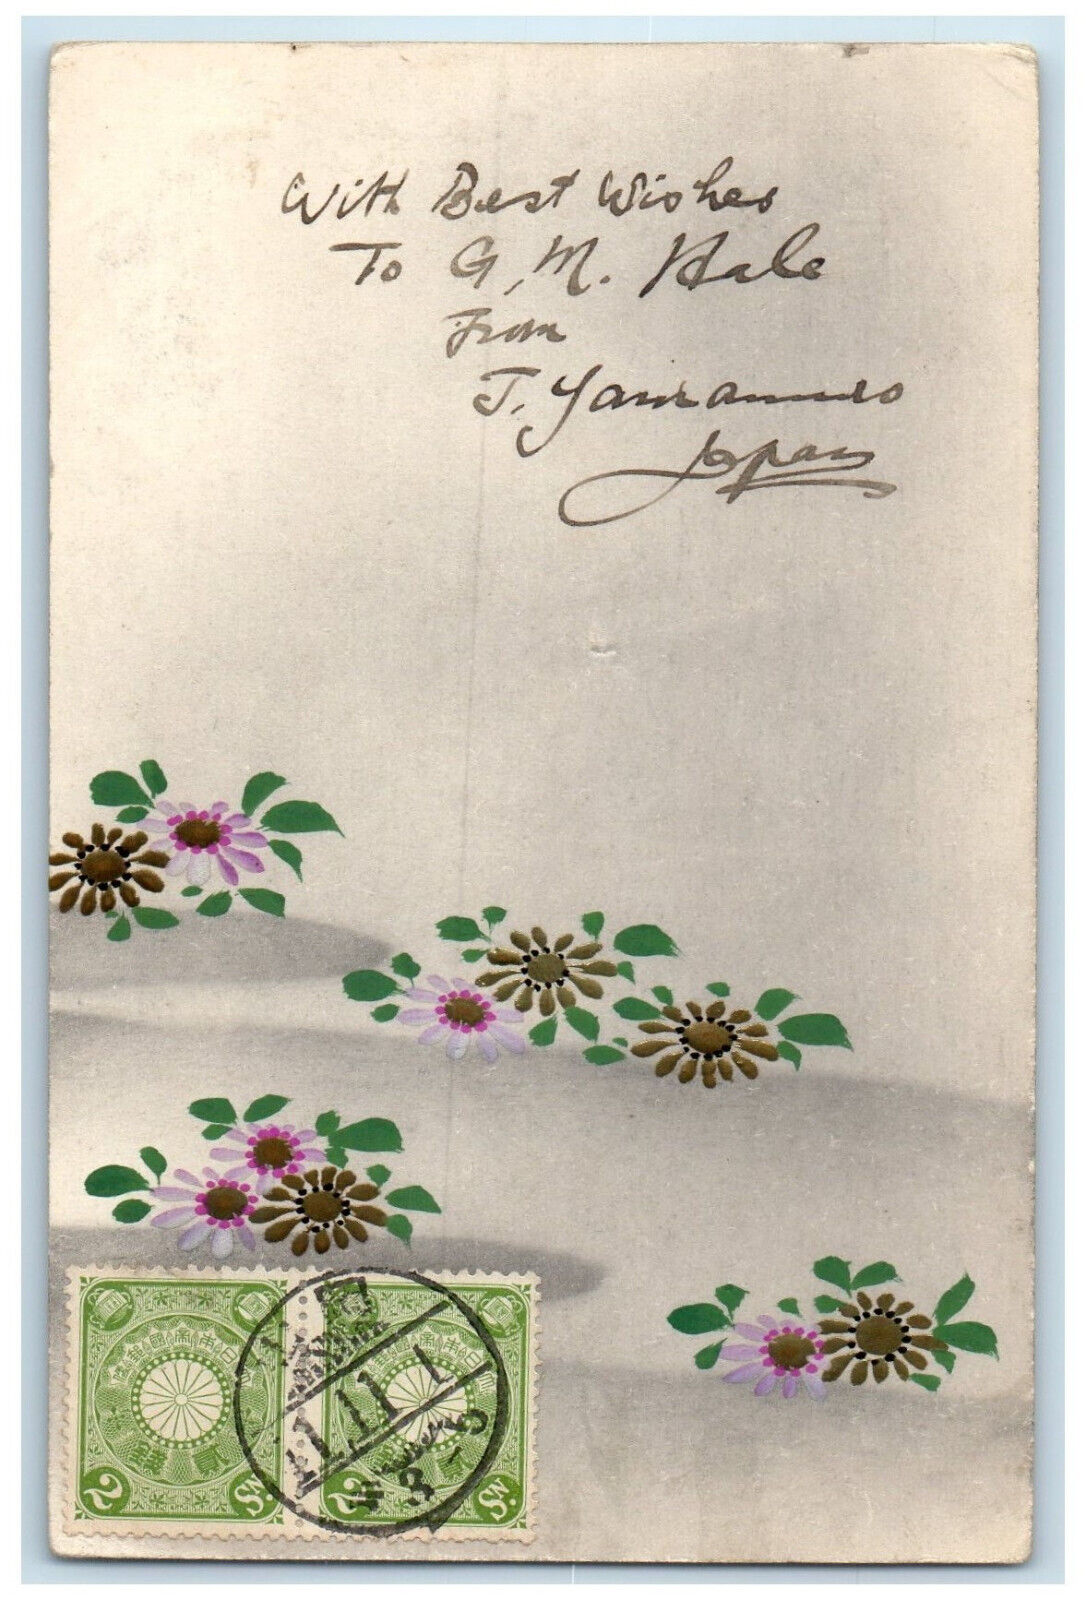 1908 Best Wishes Message Okayama Japan To New Haven CT Posted Postcard